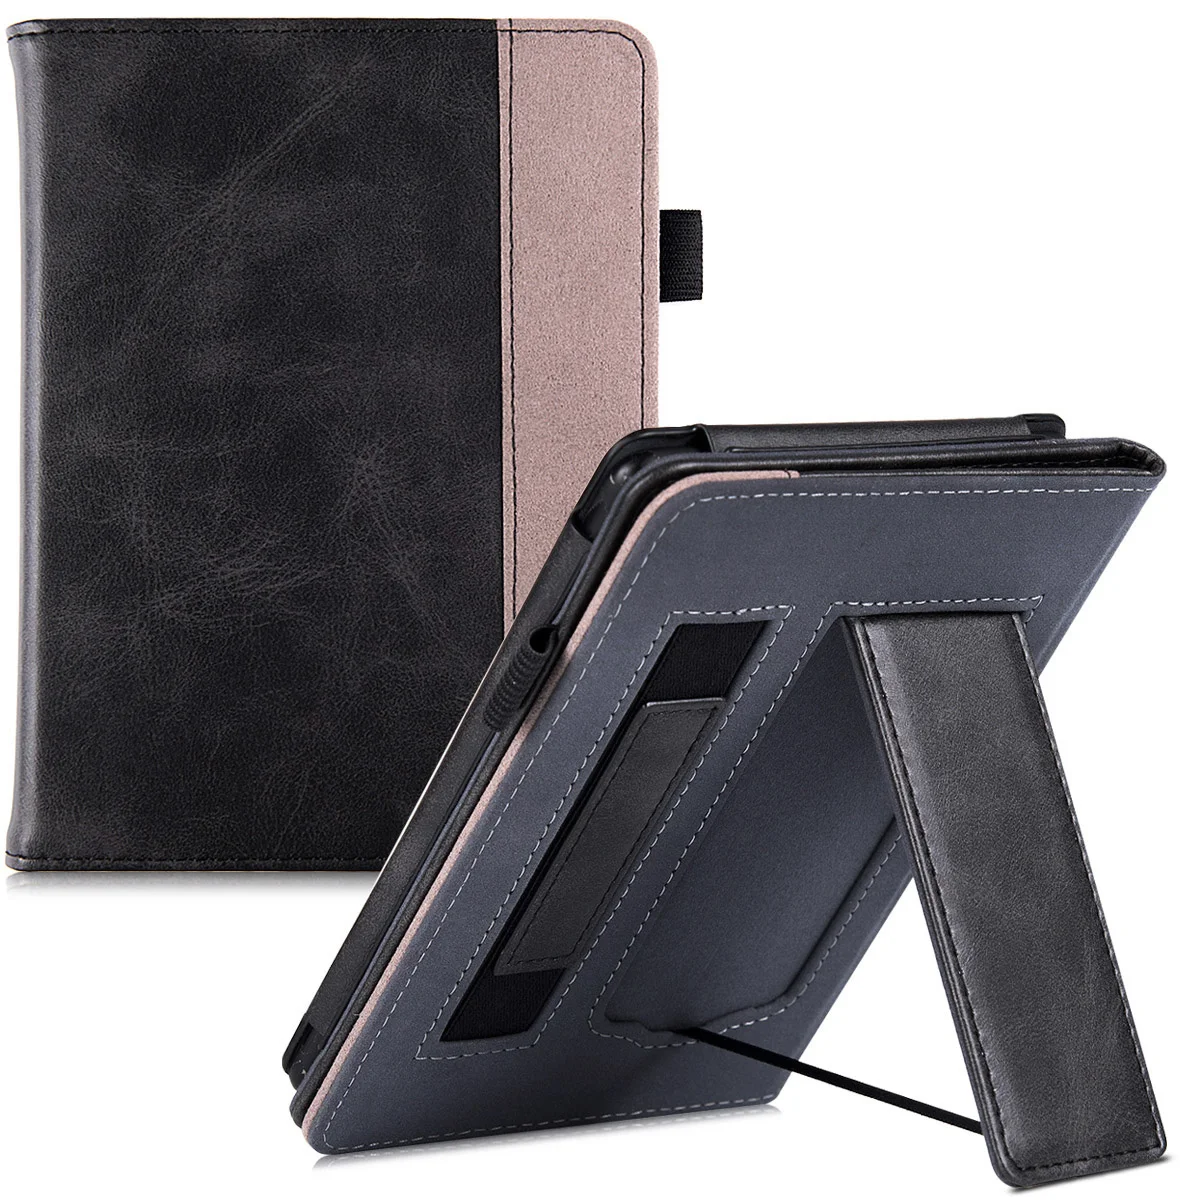 Nightfall BOZHUORUI Handheld Case for Kindle Paperwhite 10th Gen - 2018 / Fits All Paperwhite eReader - Premium PU Leather Protective Cover with Two Hand Straps/Auto Sleep/Wake 